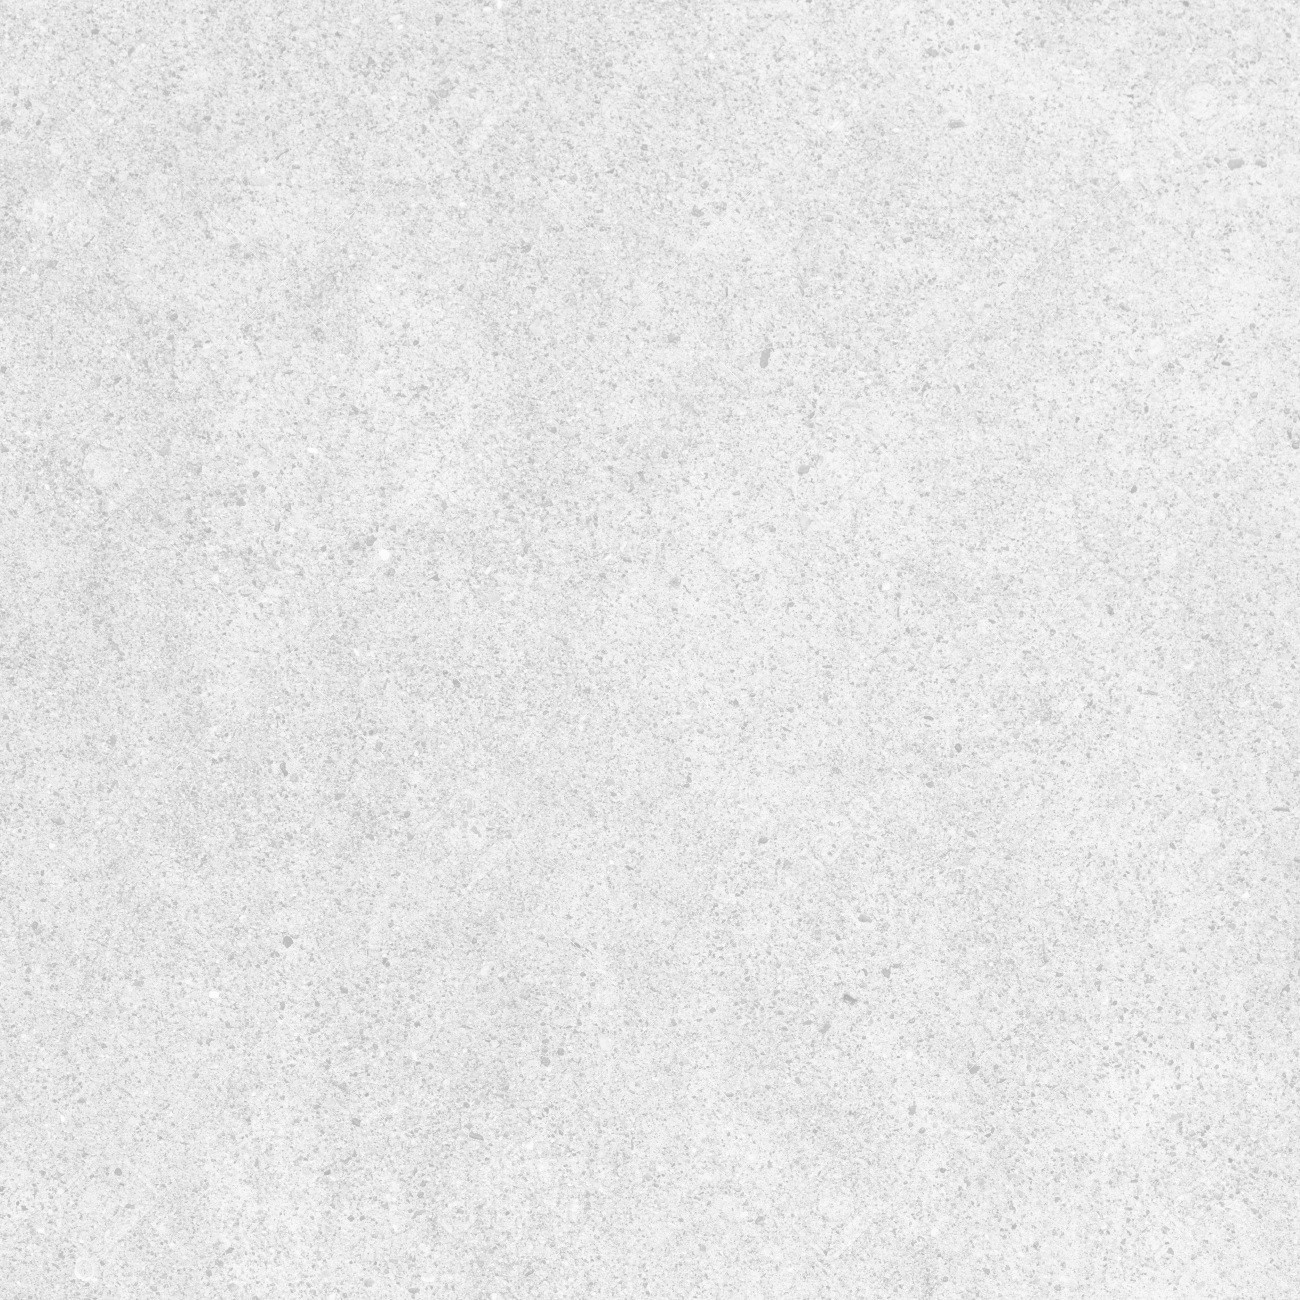 Stone Texture Seamless Png Texture And Seamless Background Of White